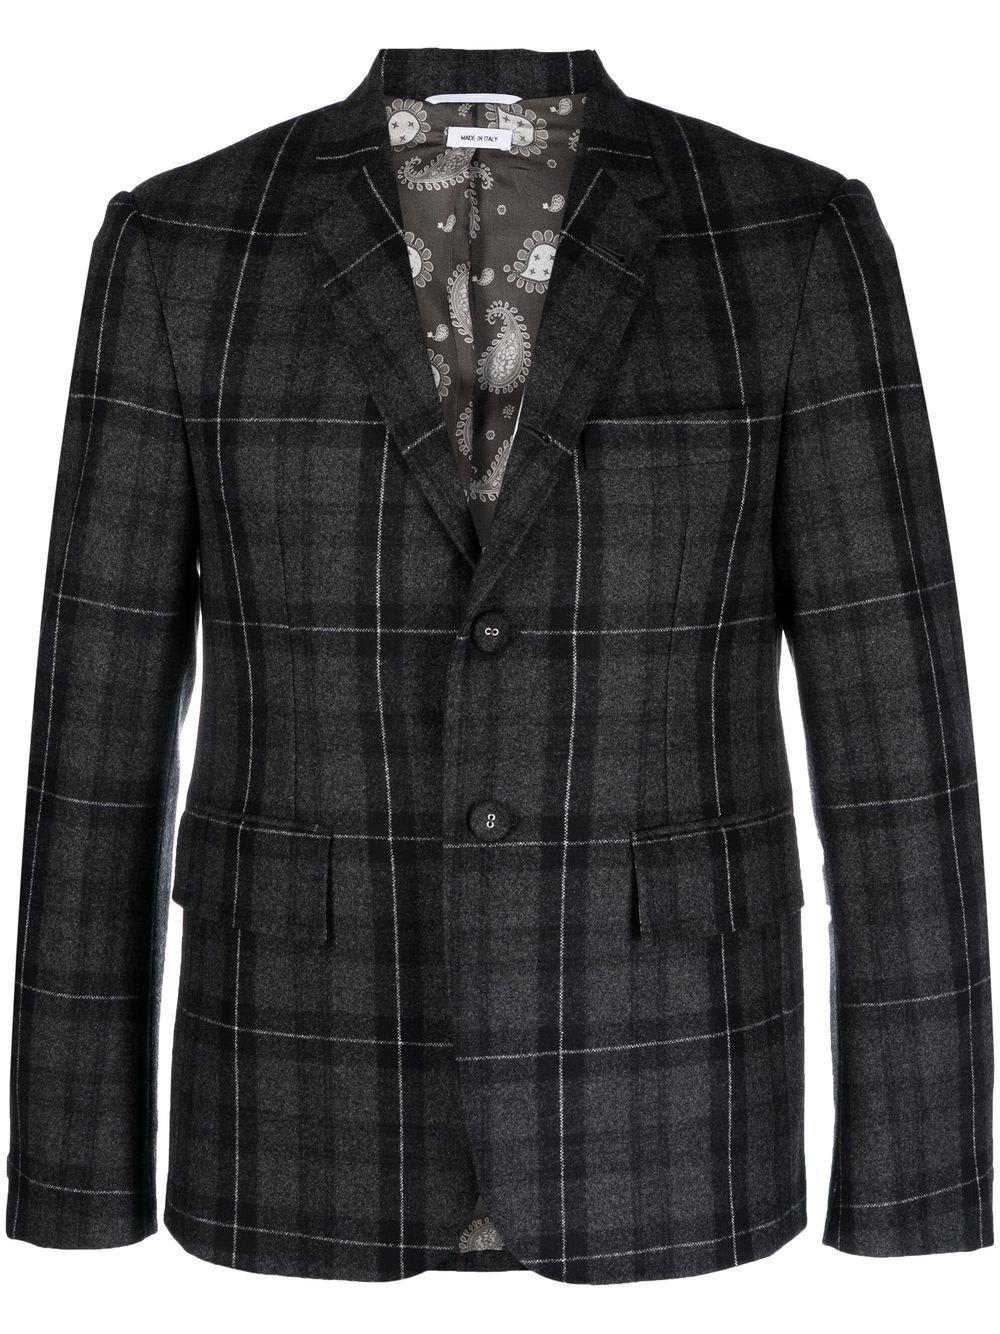 THOM BROWNE FLANNEL BUTTON-UP JACKET